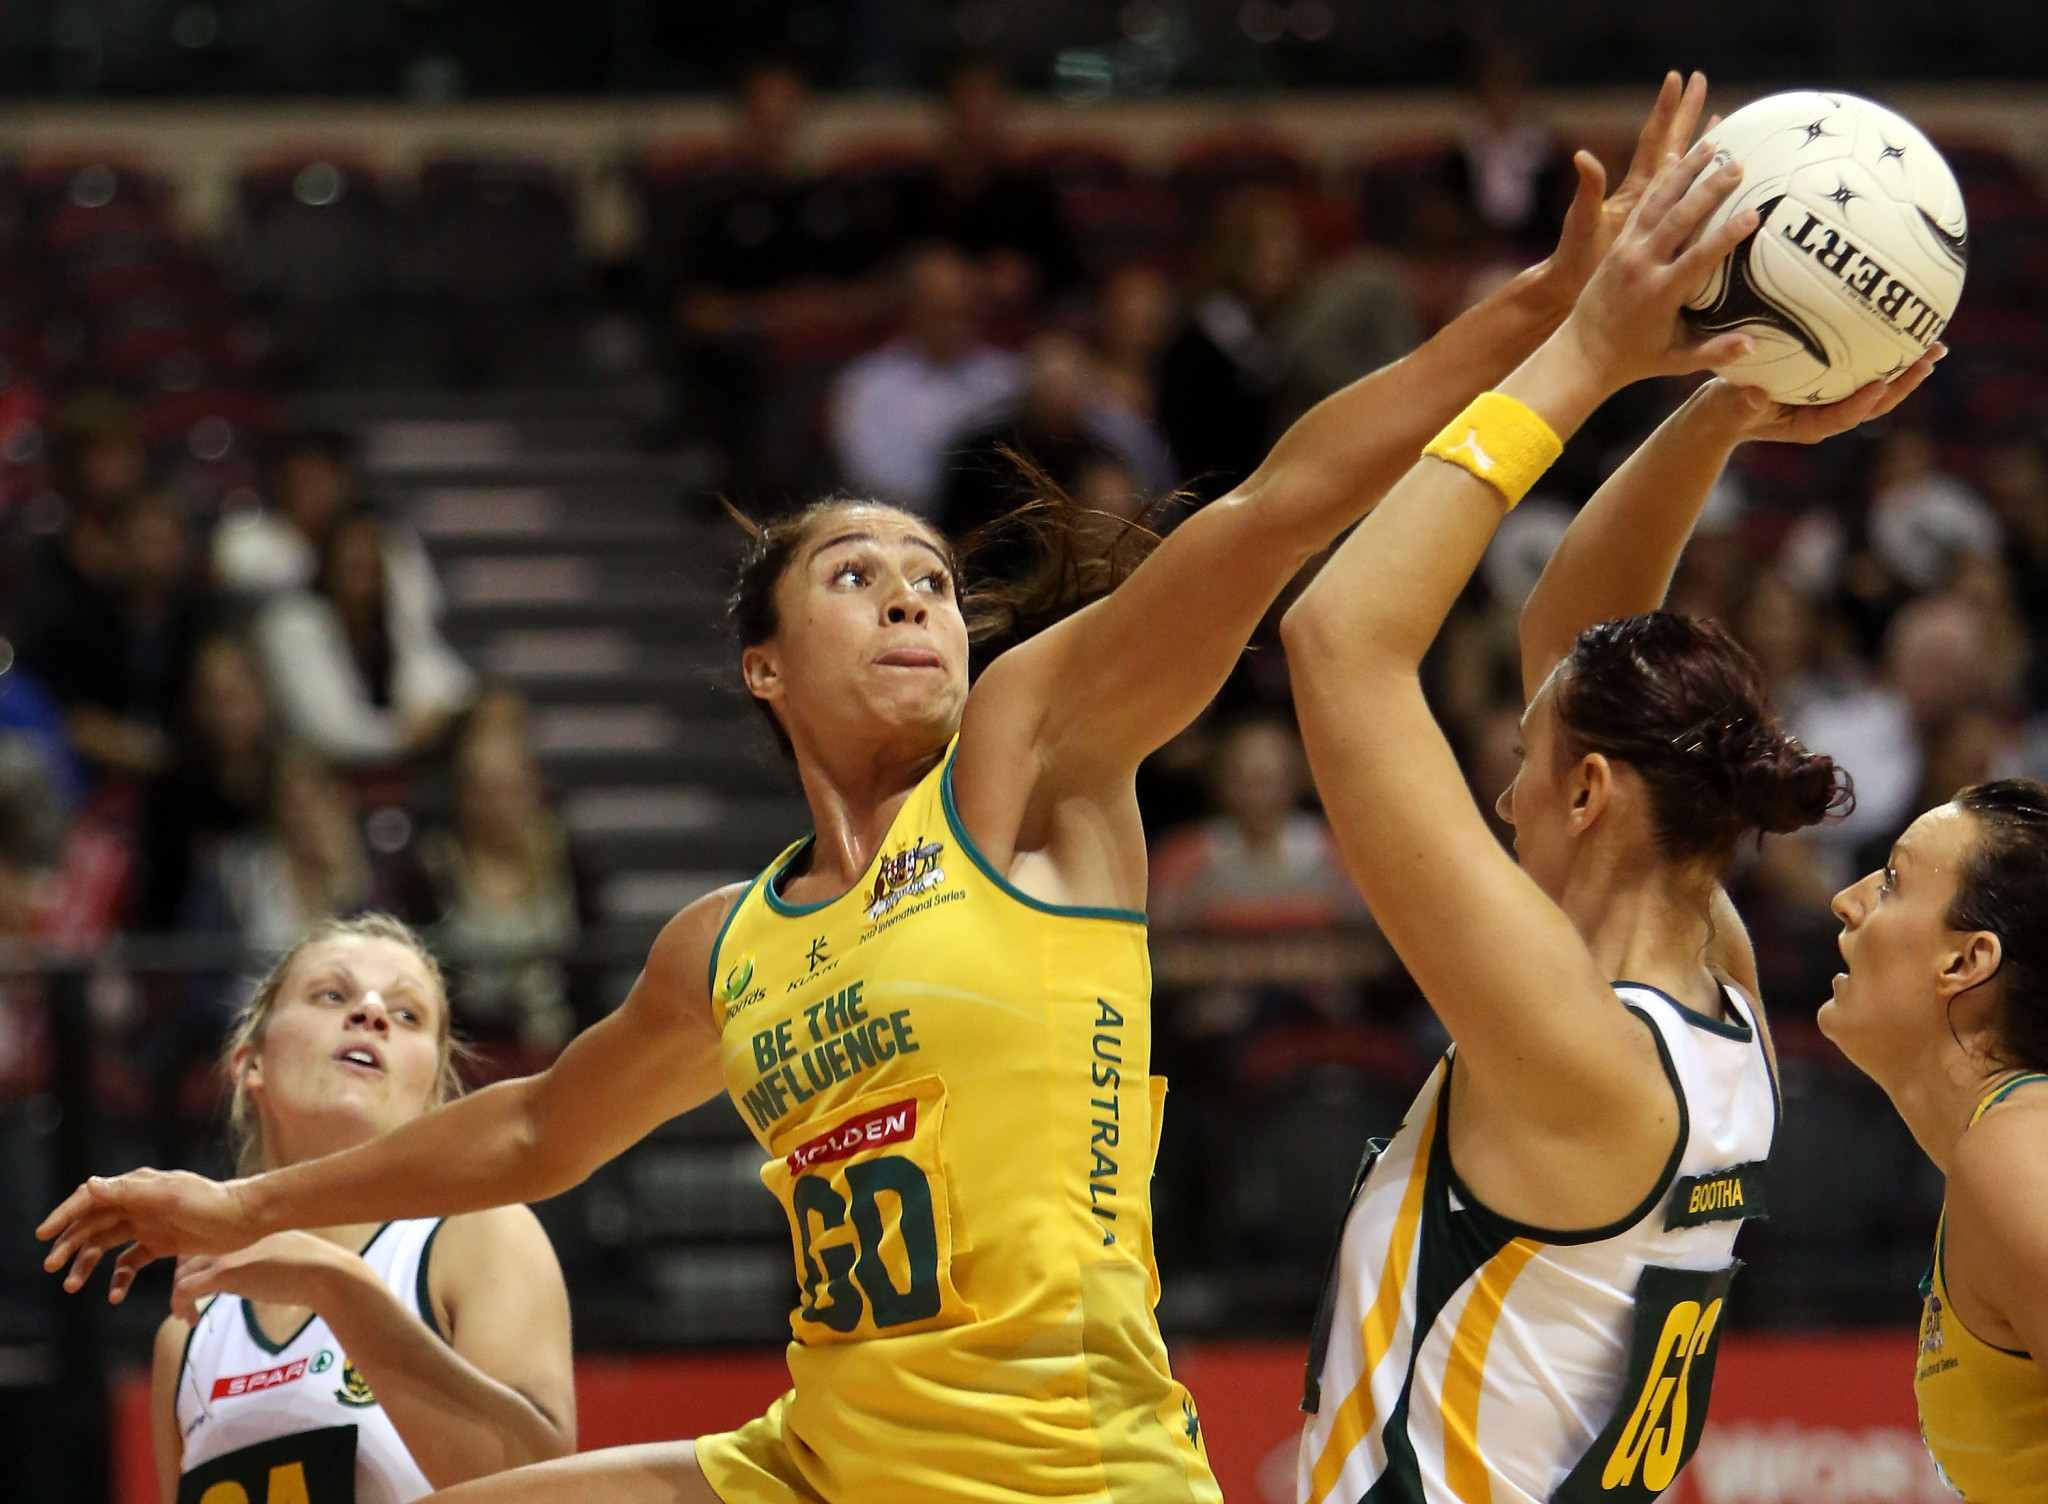 Mo'onia Gerrard won the Netball World Cup with Australia in 2007 and 2011 ©Getty Images